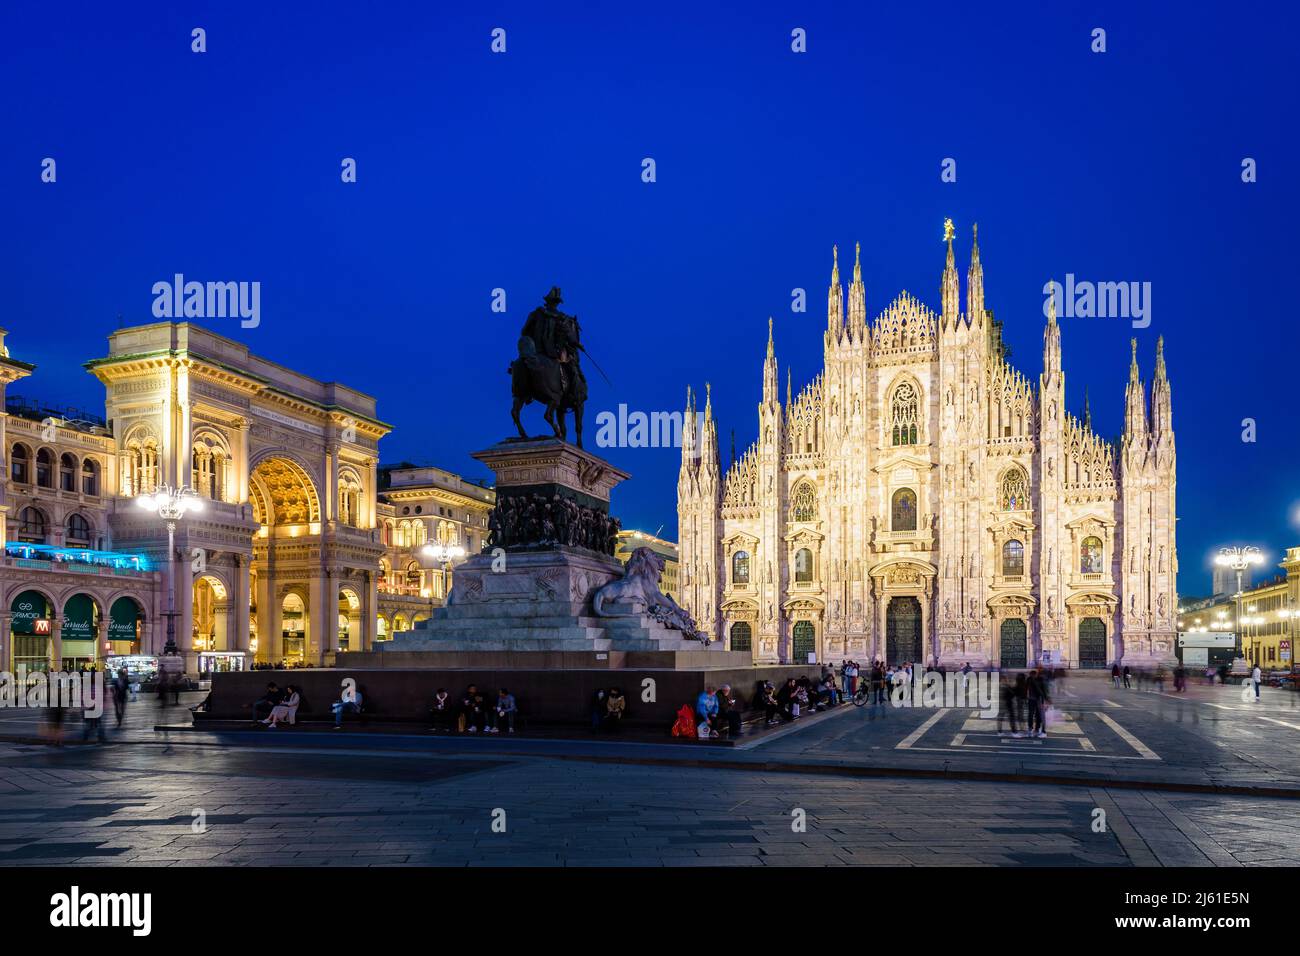 Piazza del Duomo at night in Milan, Italy, with the cathedral, the Vittorio Emanuele II gallery and the statue to Vittorio Emanuele II. Stock Photo